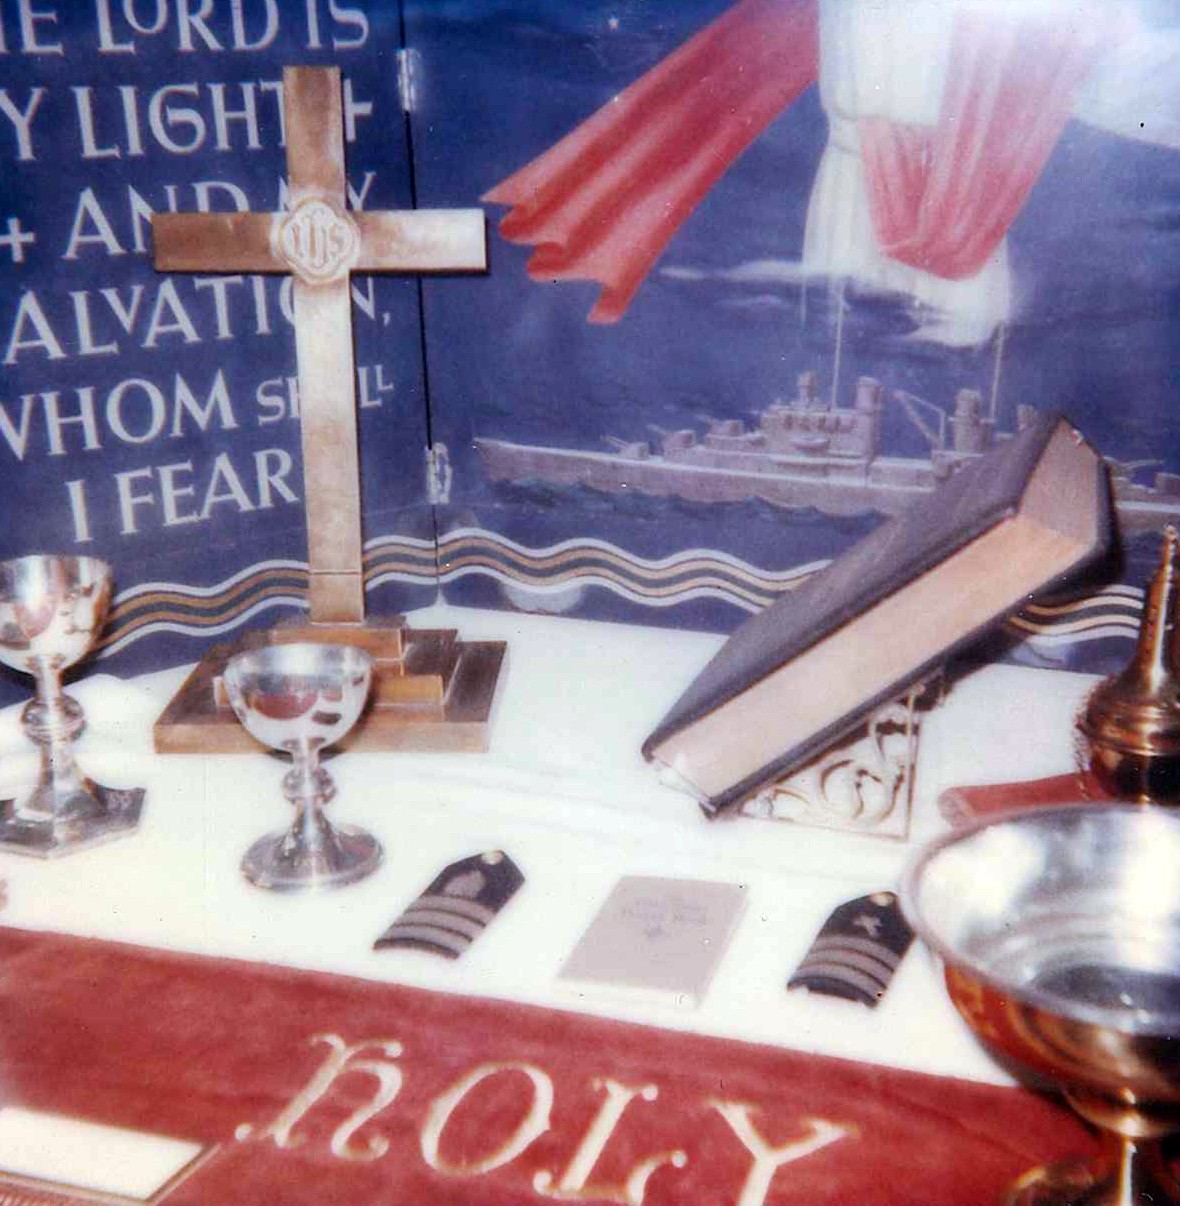 NMUSN-4561 (Color)   Navy Memorial Museum (now National Museum of the U.S. Navy), Chaplain’s Exhibit. This color photograph shows one of the cases utilized for the U.S. Navy Chaplain Corps exhibit on display at the museum for a couple of decades, circa 1970s. National Museum of the U.S. Navy Photograph.  